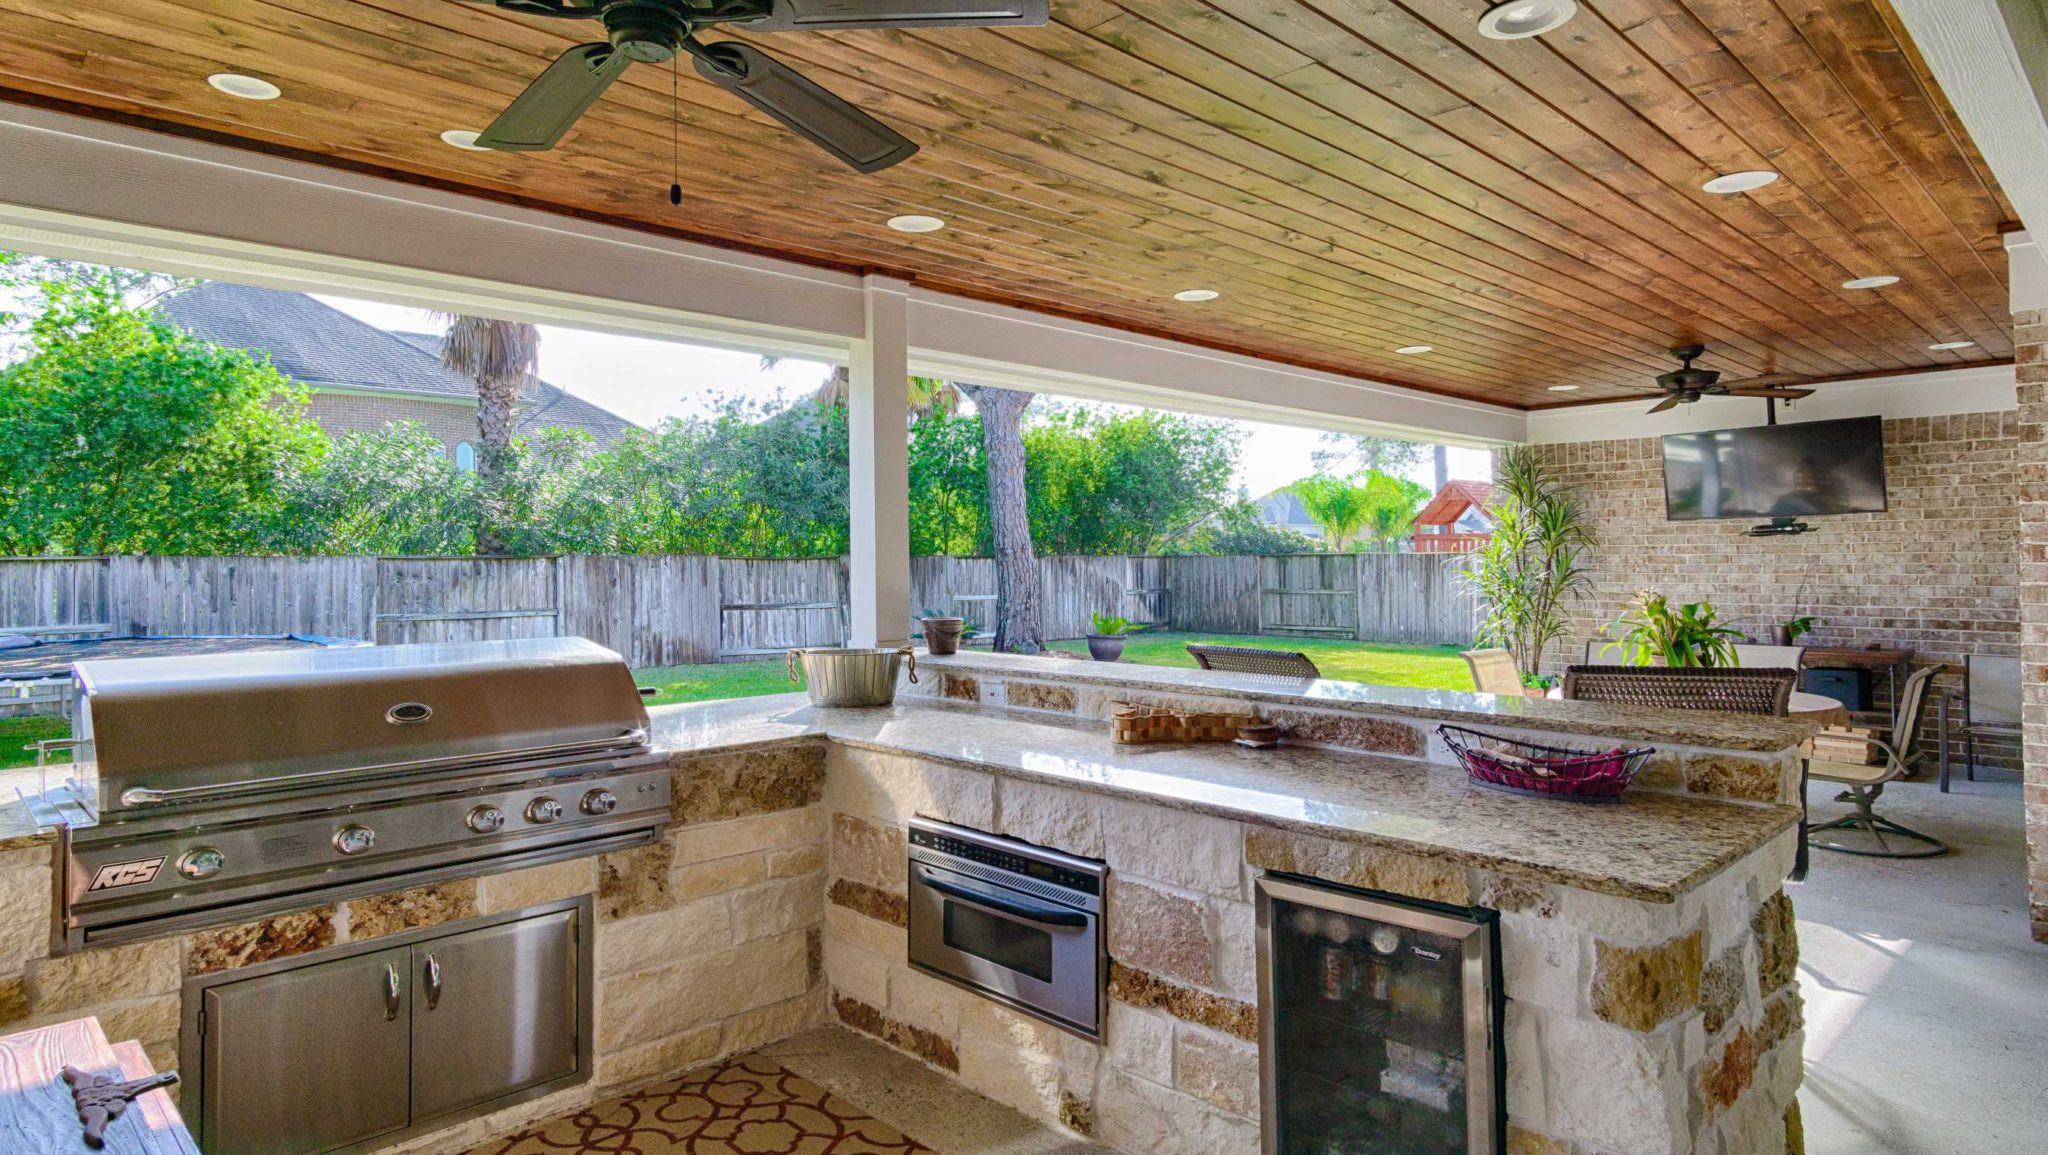 Covered Outdoor Kitchen Plans
 The Woodlands Outdoor Kitchen & Covered Patio Construction